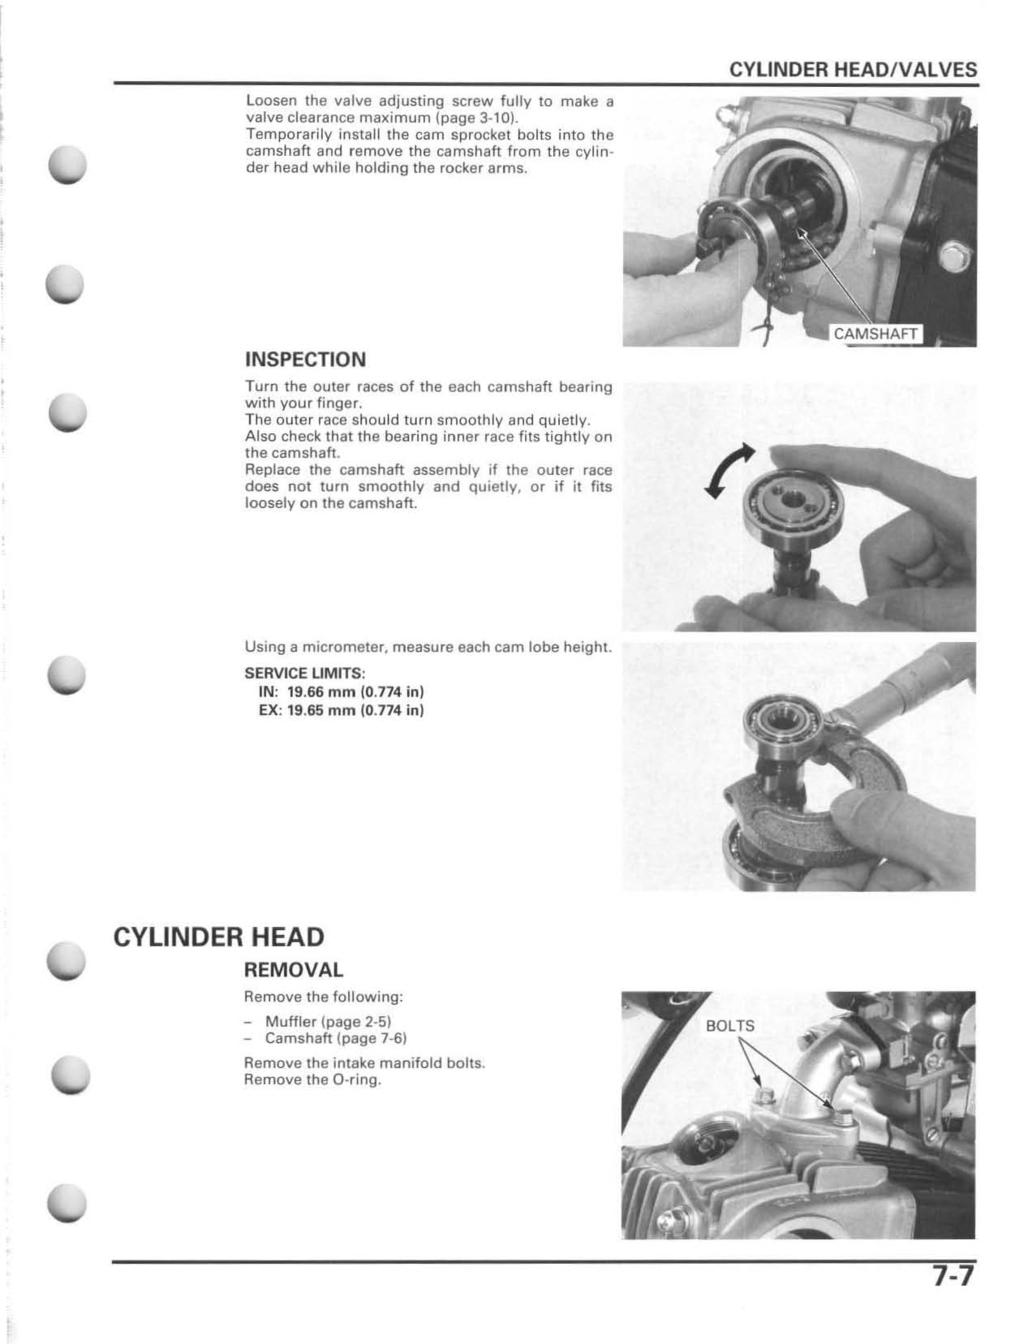 CYLINDER HEADIV ALVES loosen the valve adjusting screw fully to make a valve clearance maximum (page 3 10).